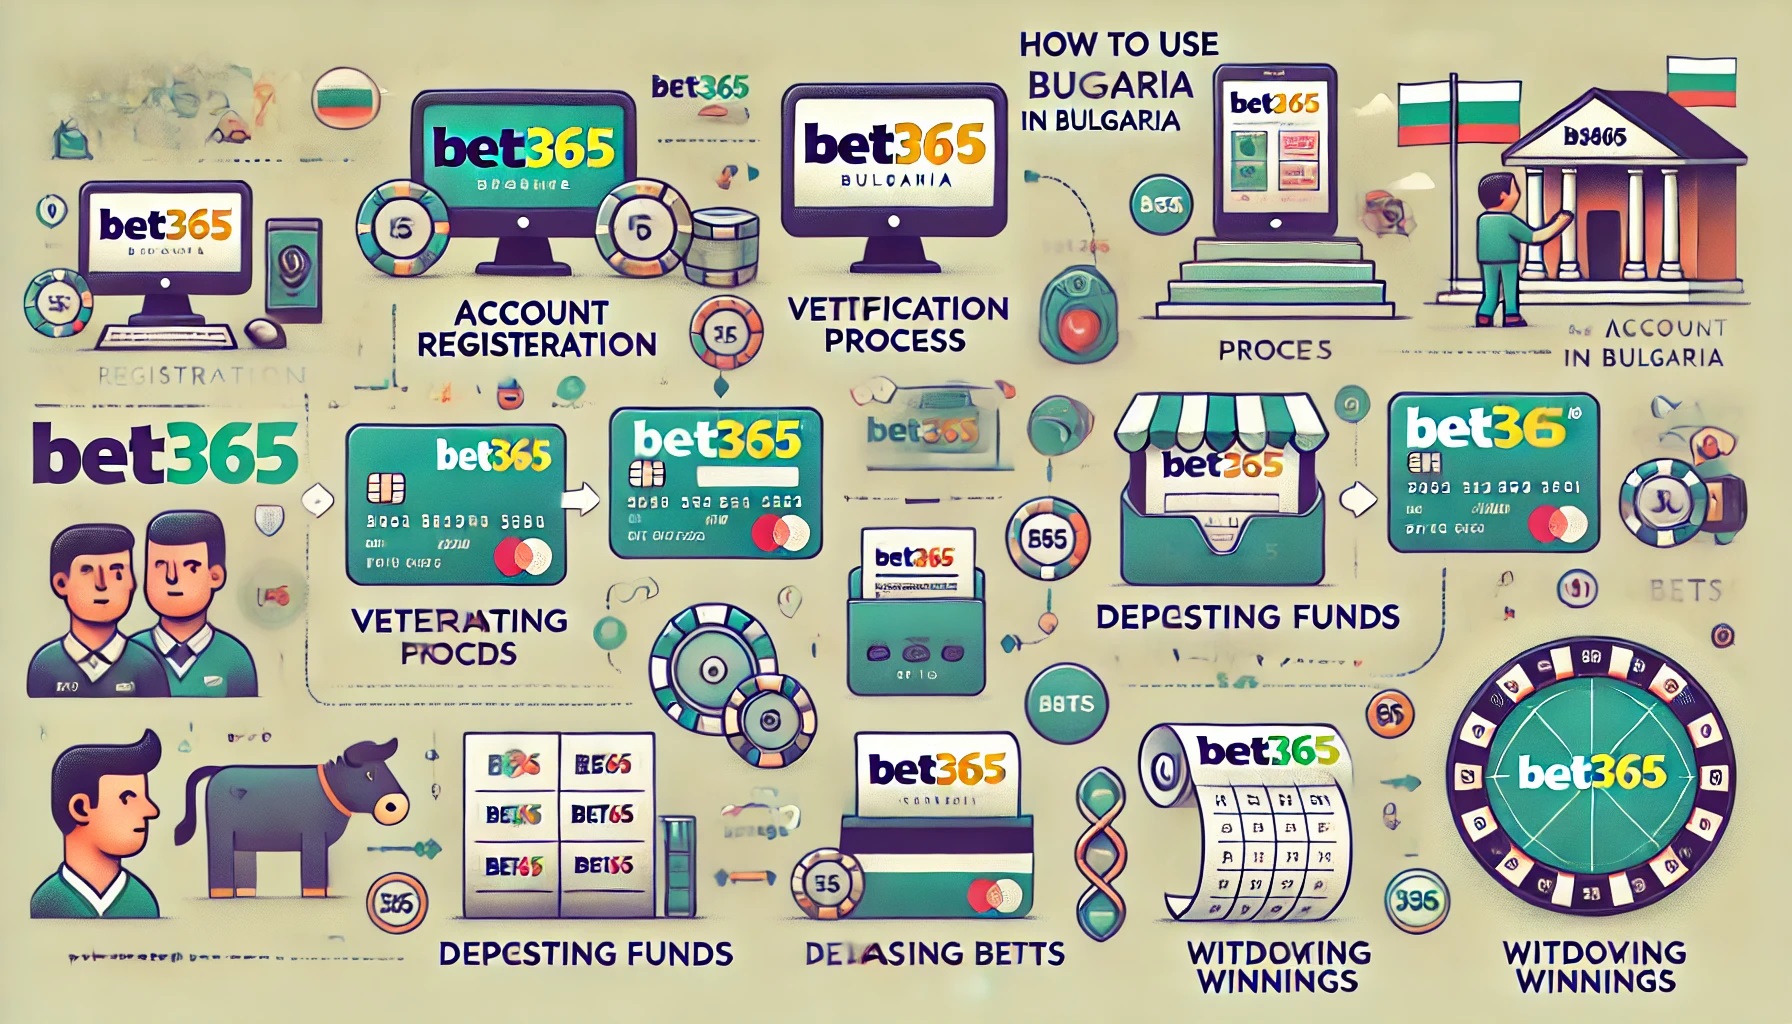 How To Use Bet365 In Bulgaria: A Complete Guide